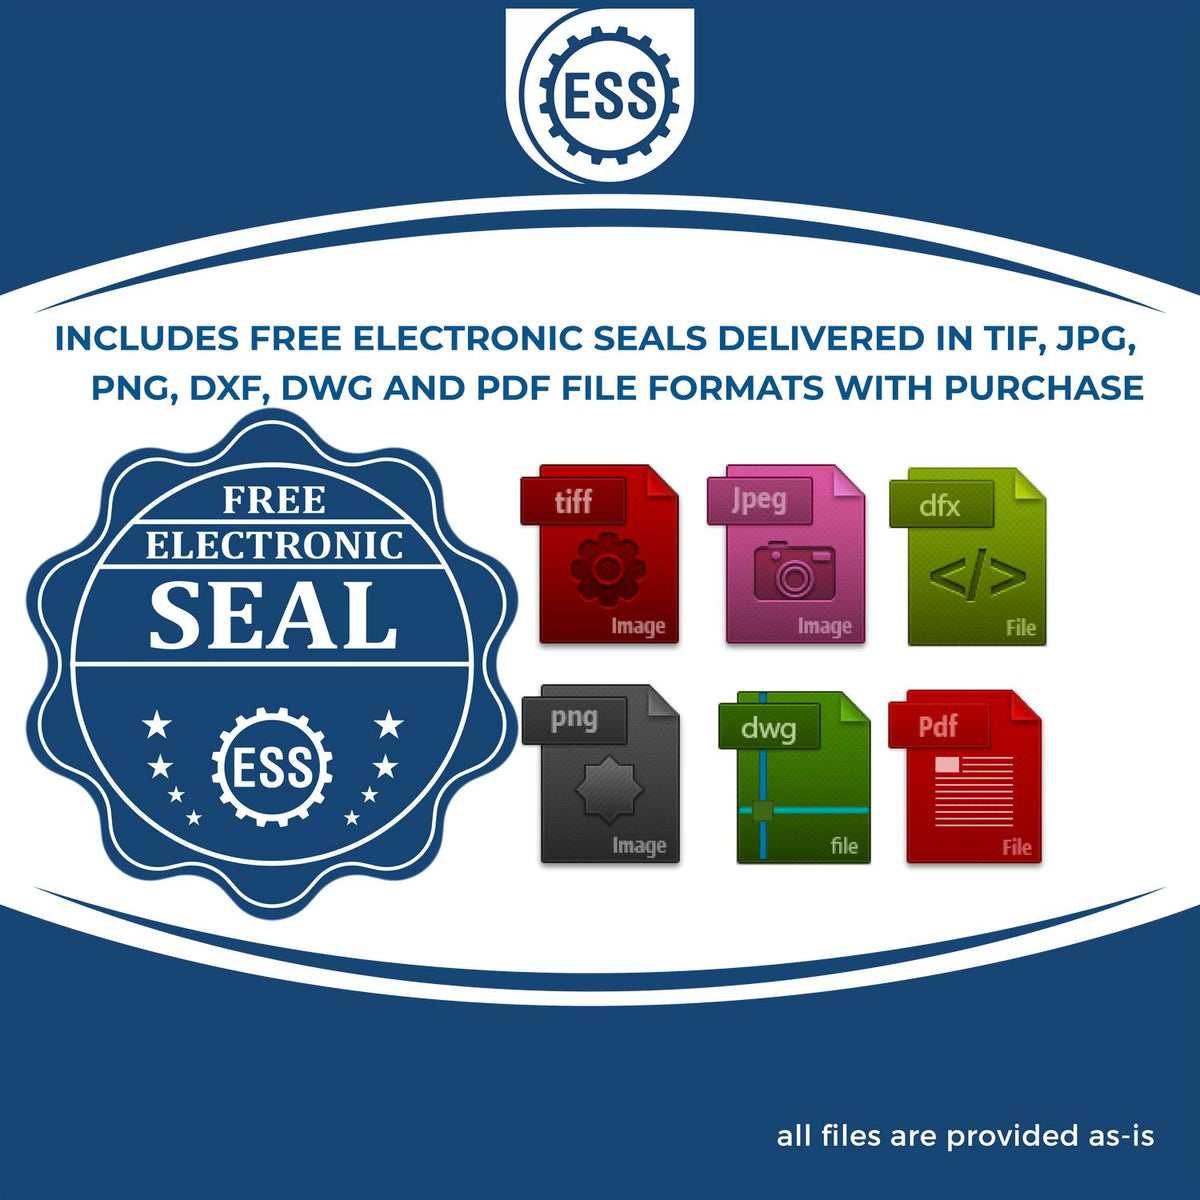 An infographic for the free electronic seal for the Wooden Handle California State Seal Notary Public Stamp illustrating the different file type icons such as DXF, DWG, TIF, JPG and PNG.